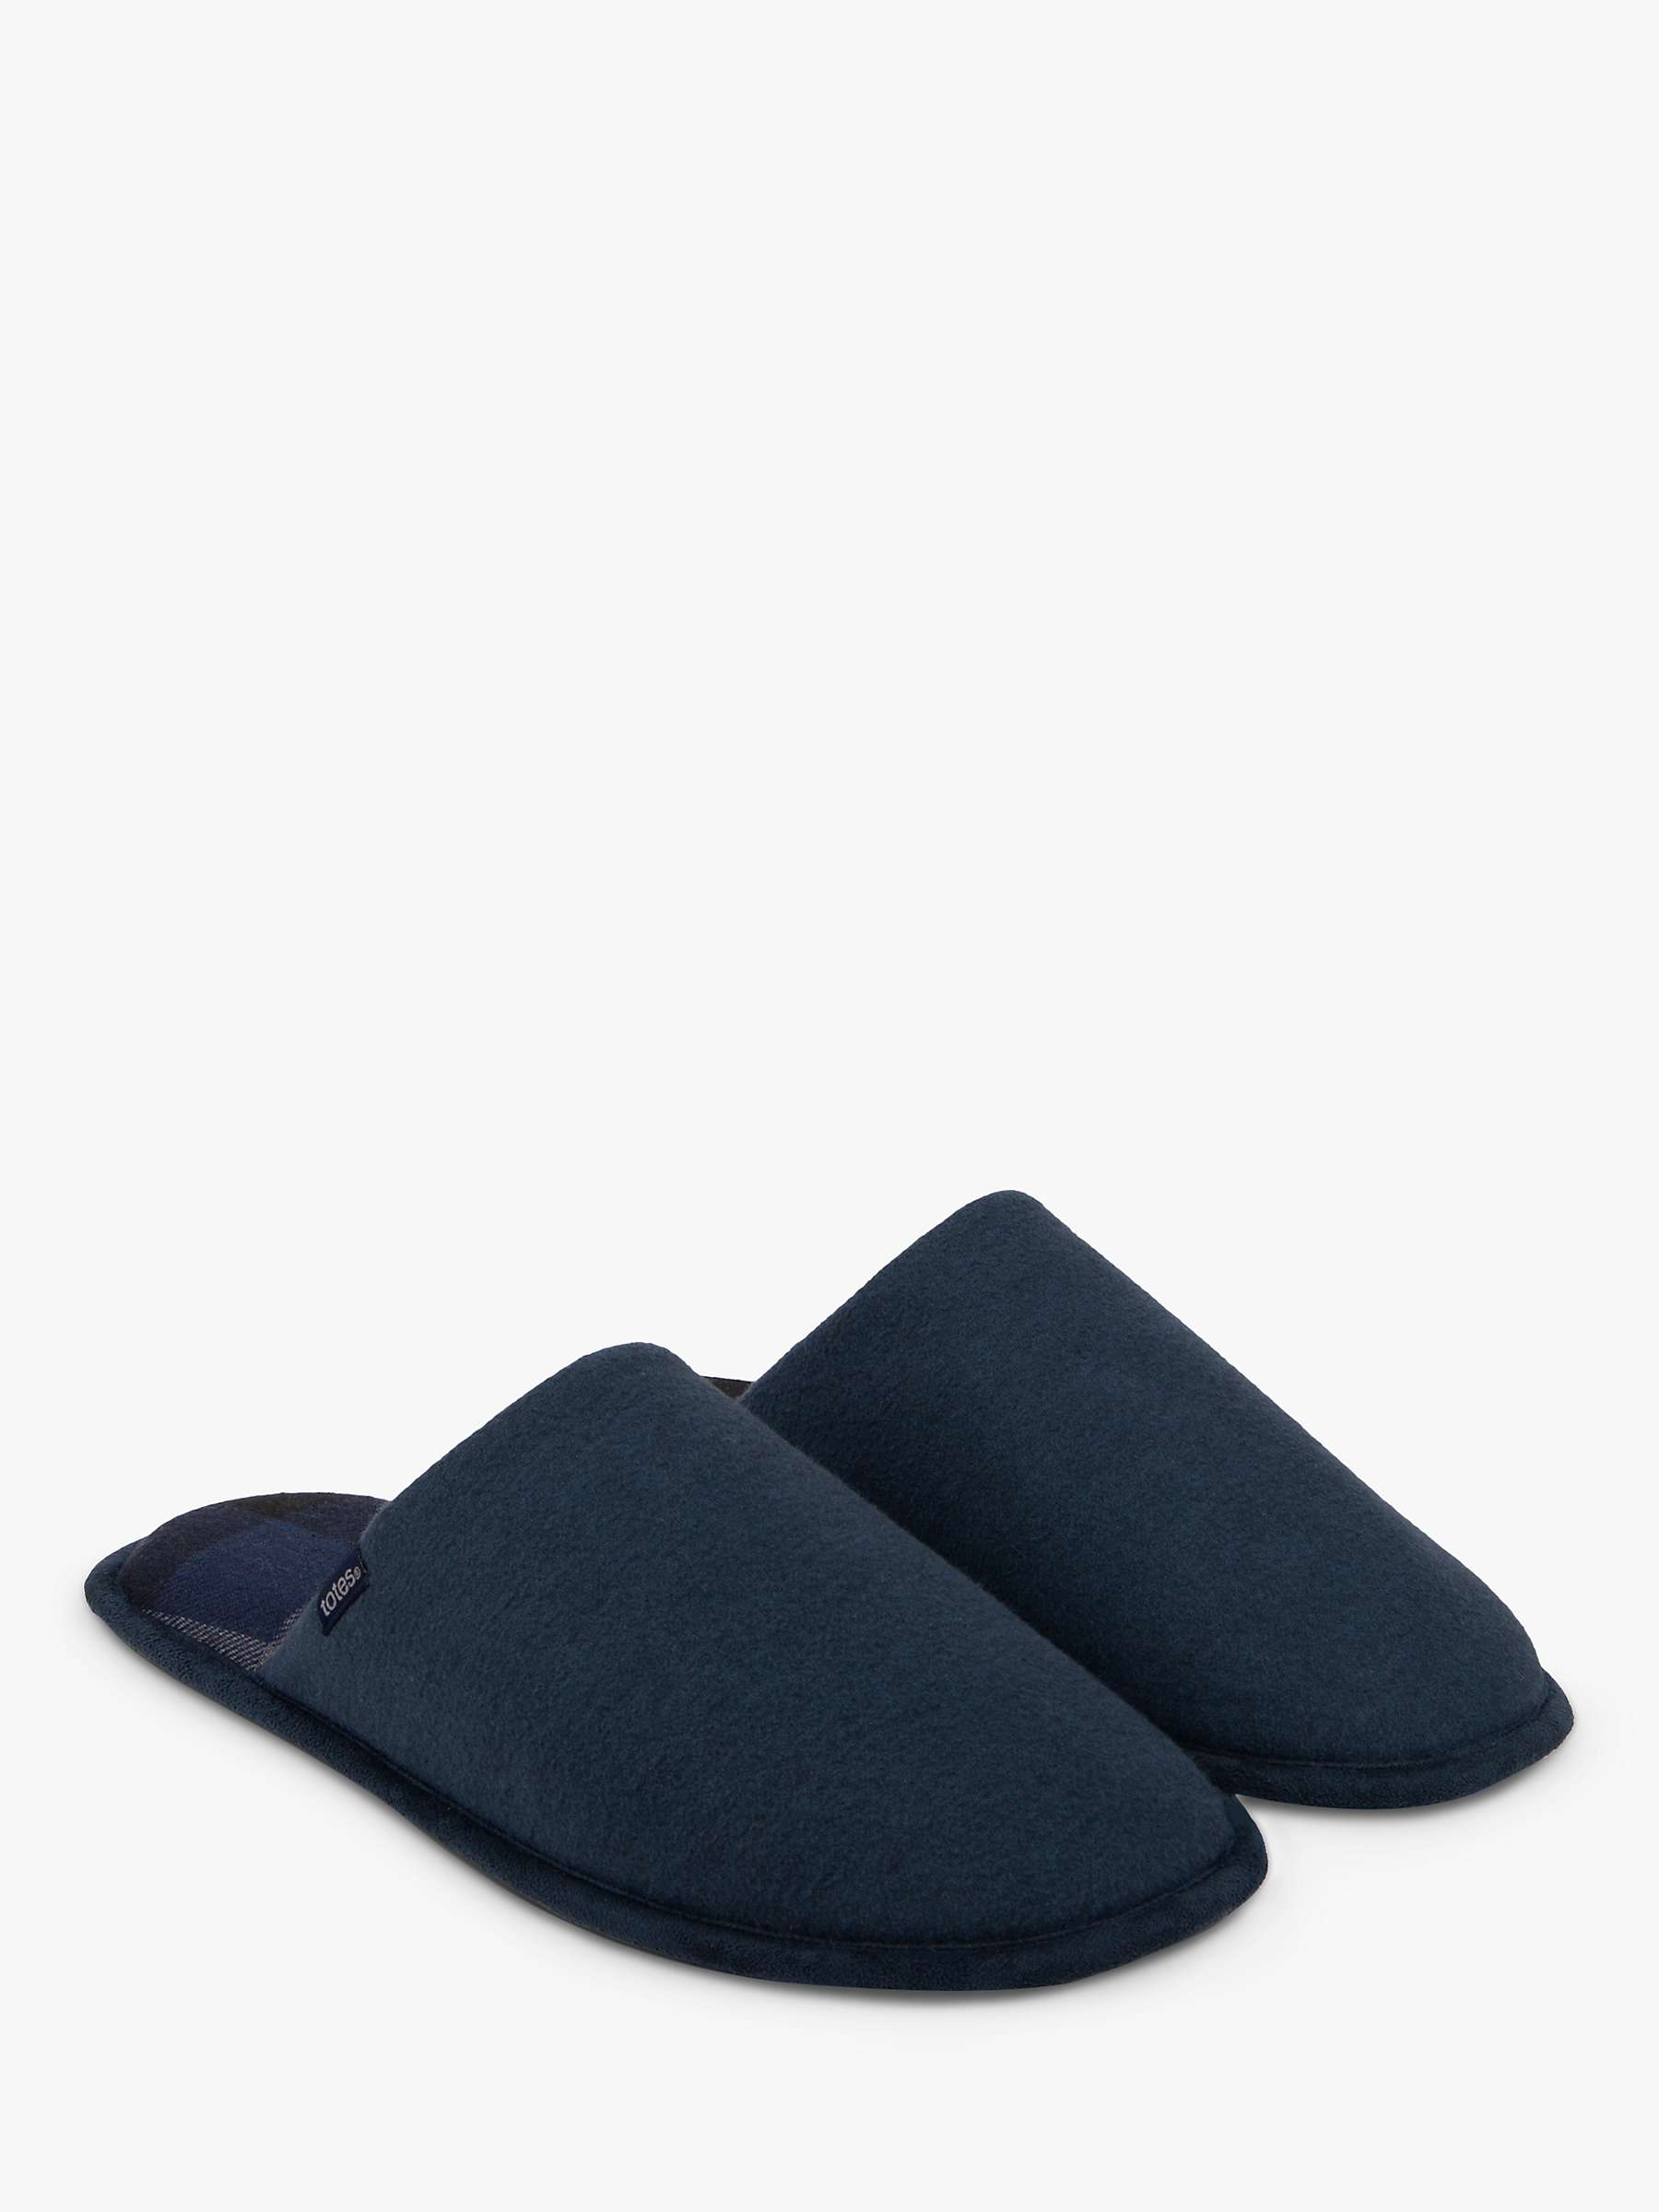 Buy totes Check Lining Mule Slippers, Navy Online at johnlewis.com